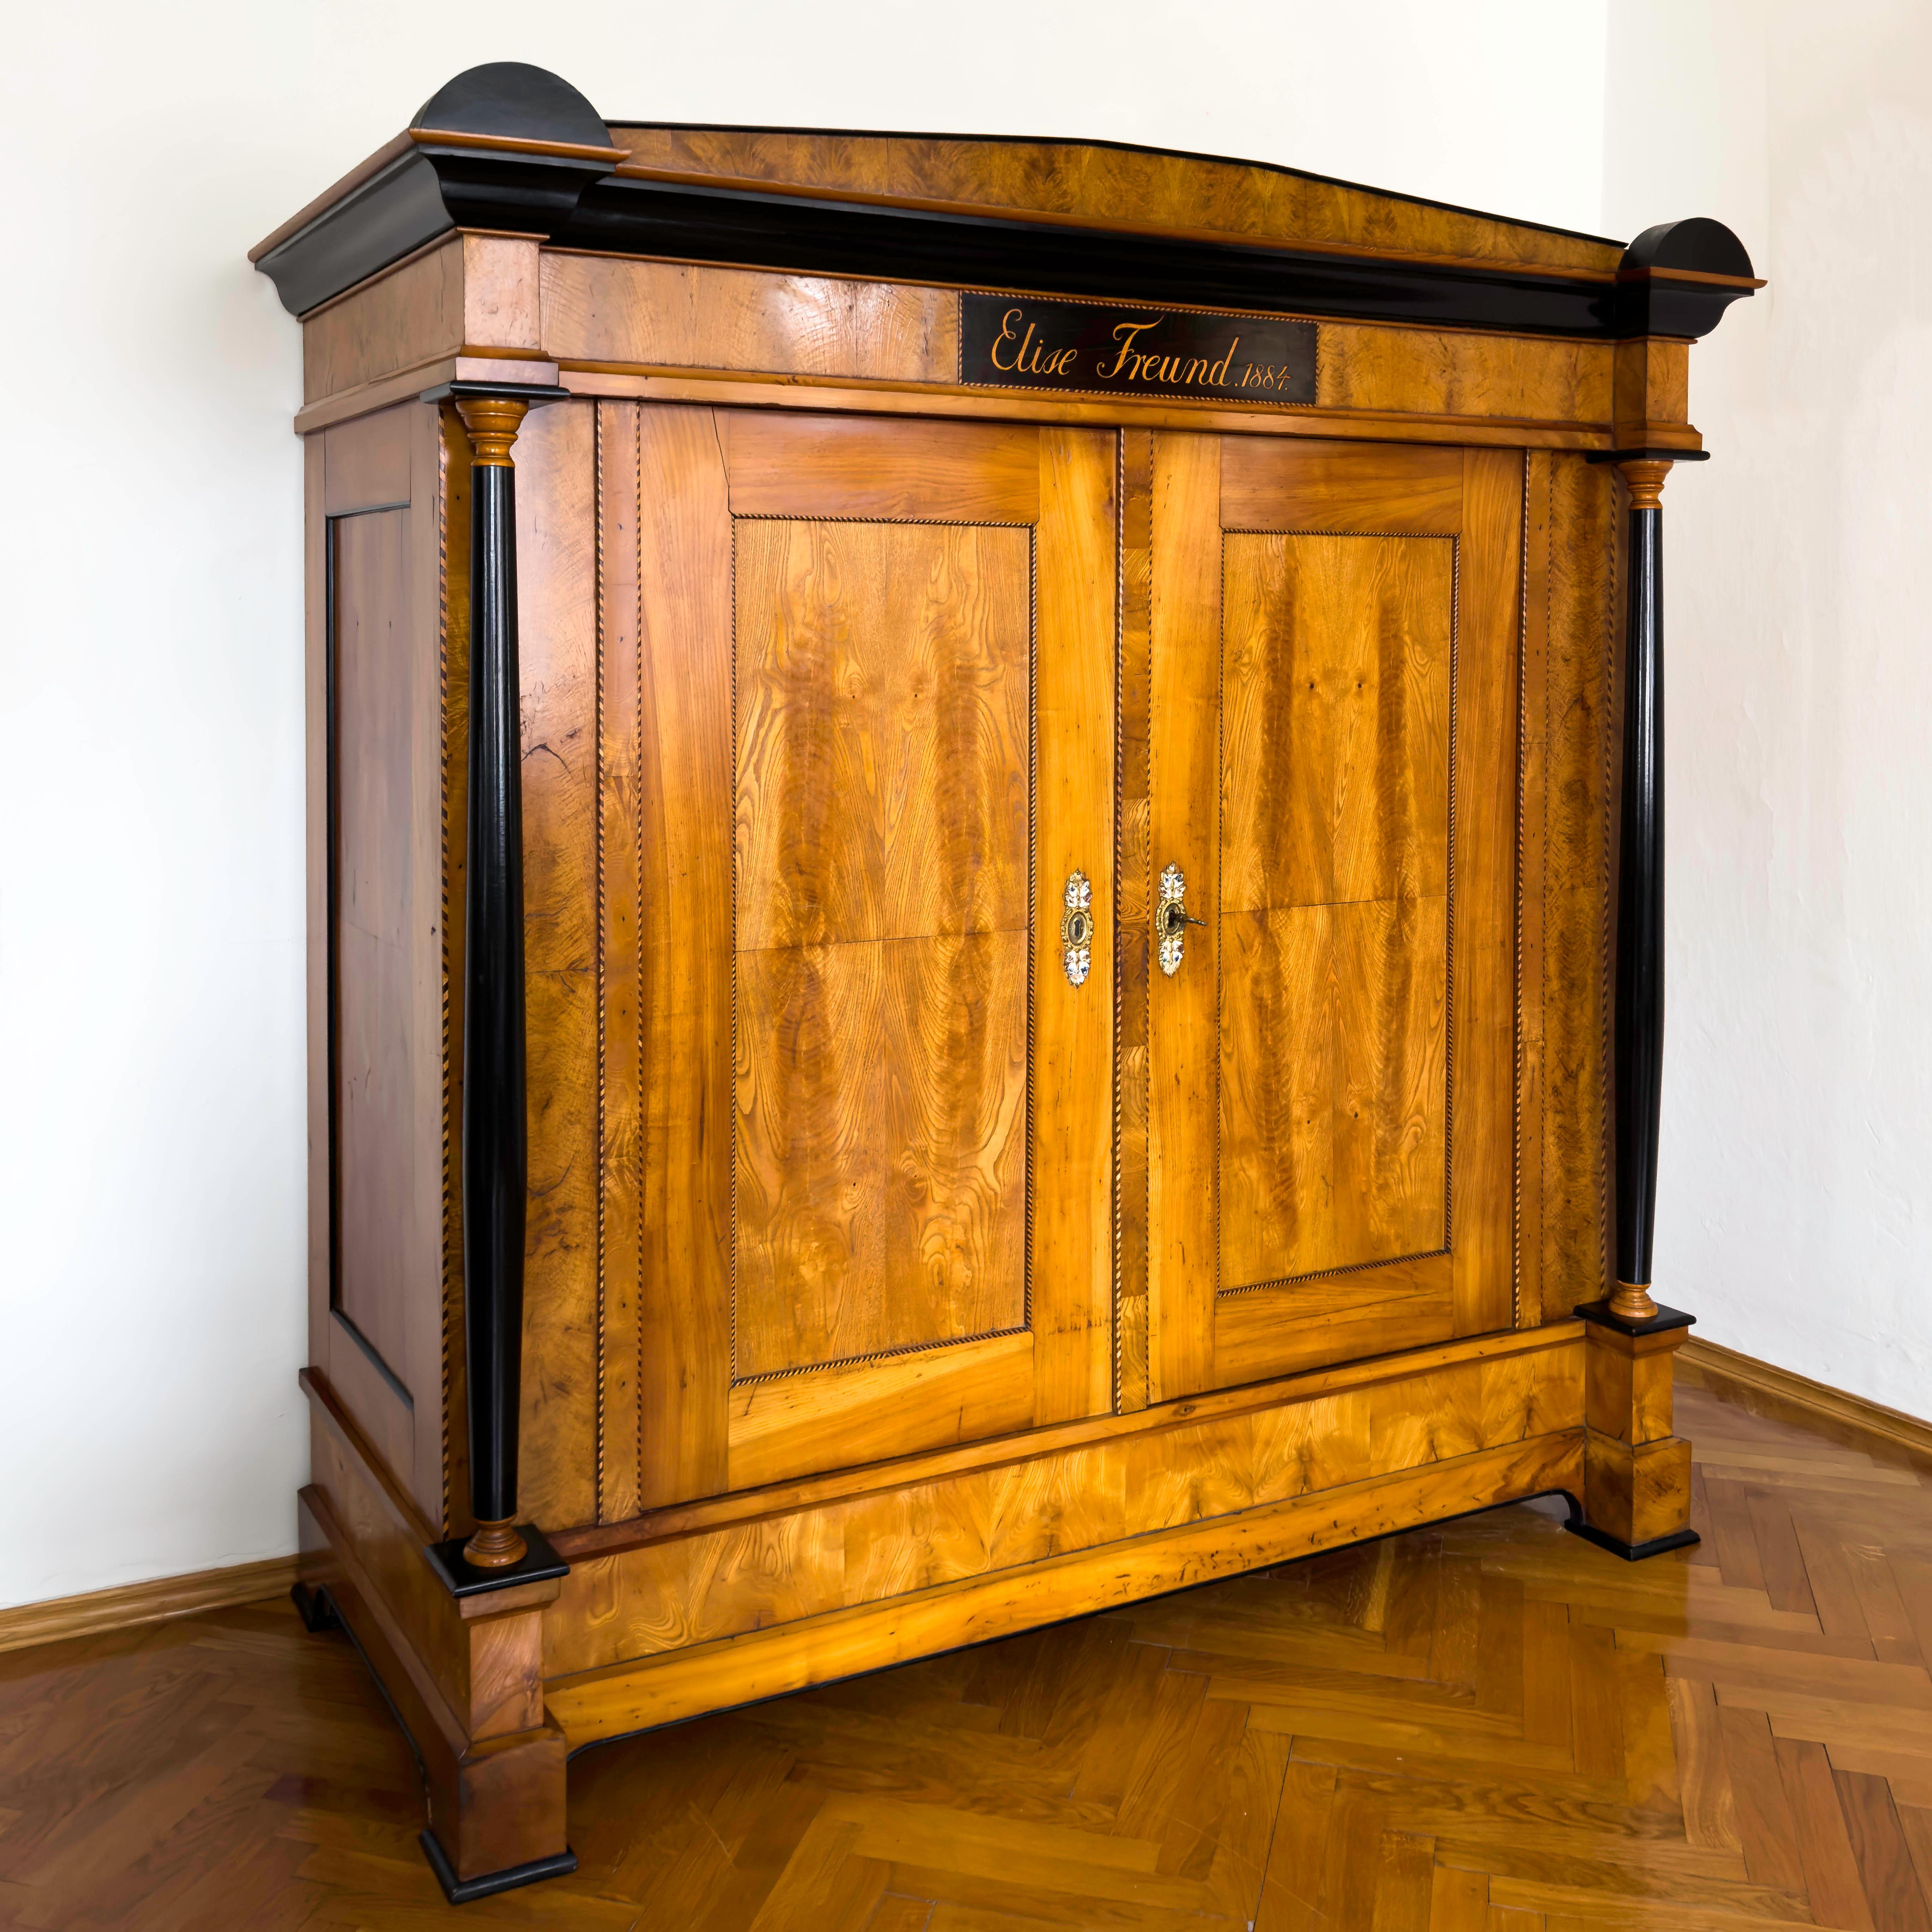 Large two-door wardrobe in ash and cherry with fillet band inlays and ebonised columns. The cornice with accentuated pediment and ebonised segmental elements is inscribed: Elise Freund, 1884. The sides are coffered and framed with ebonised profiles.